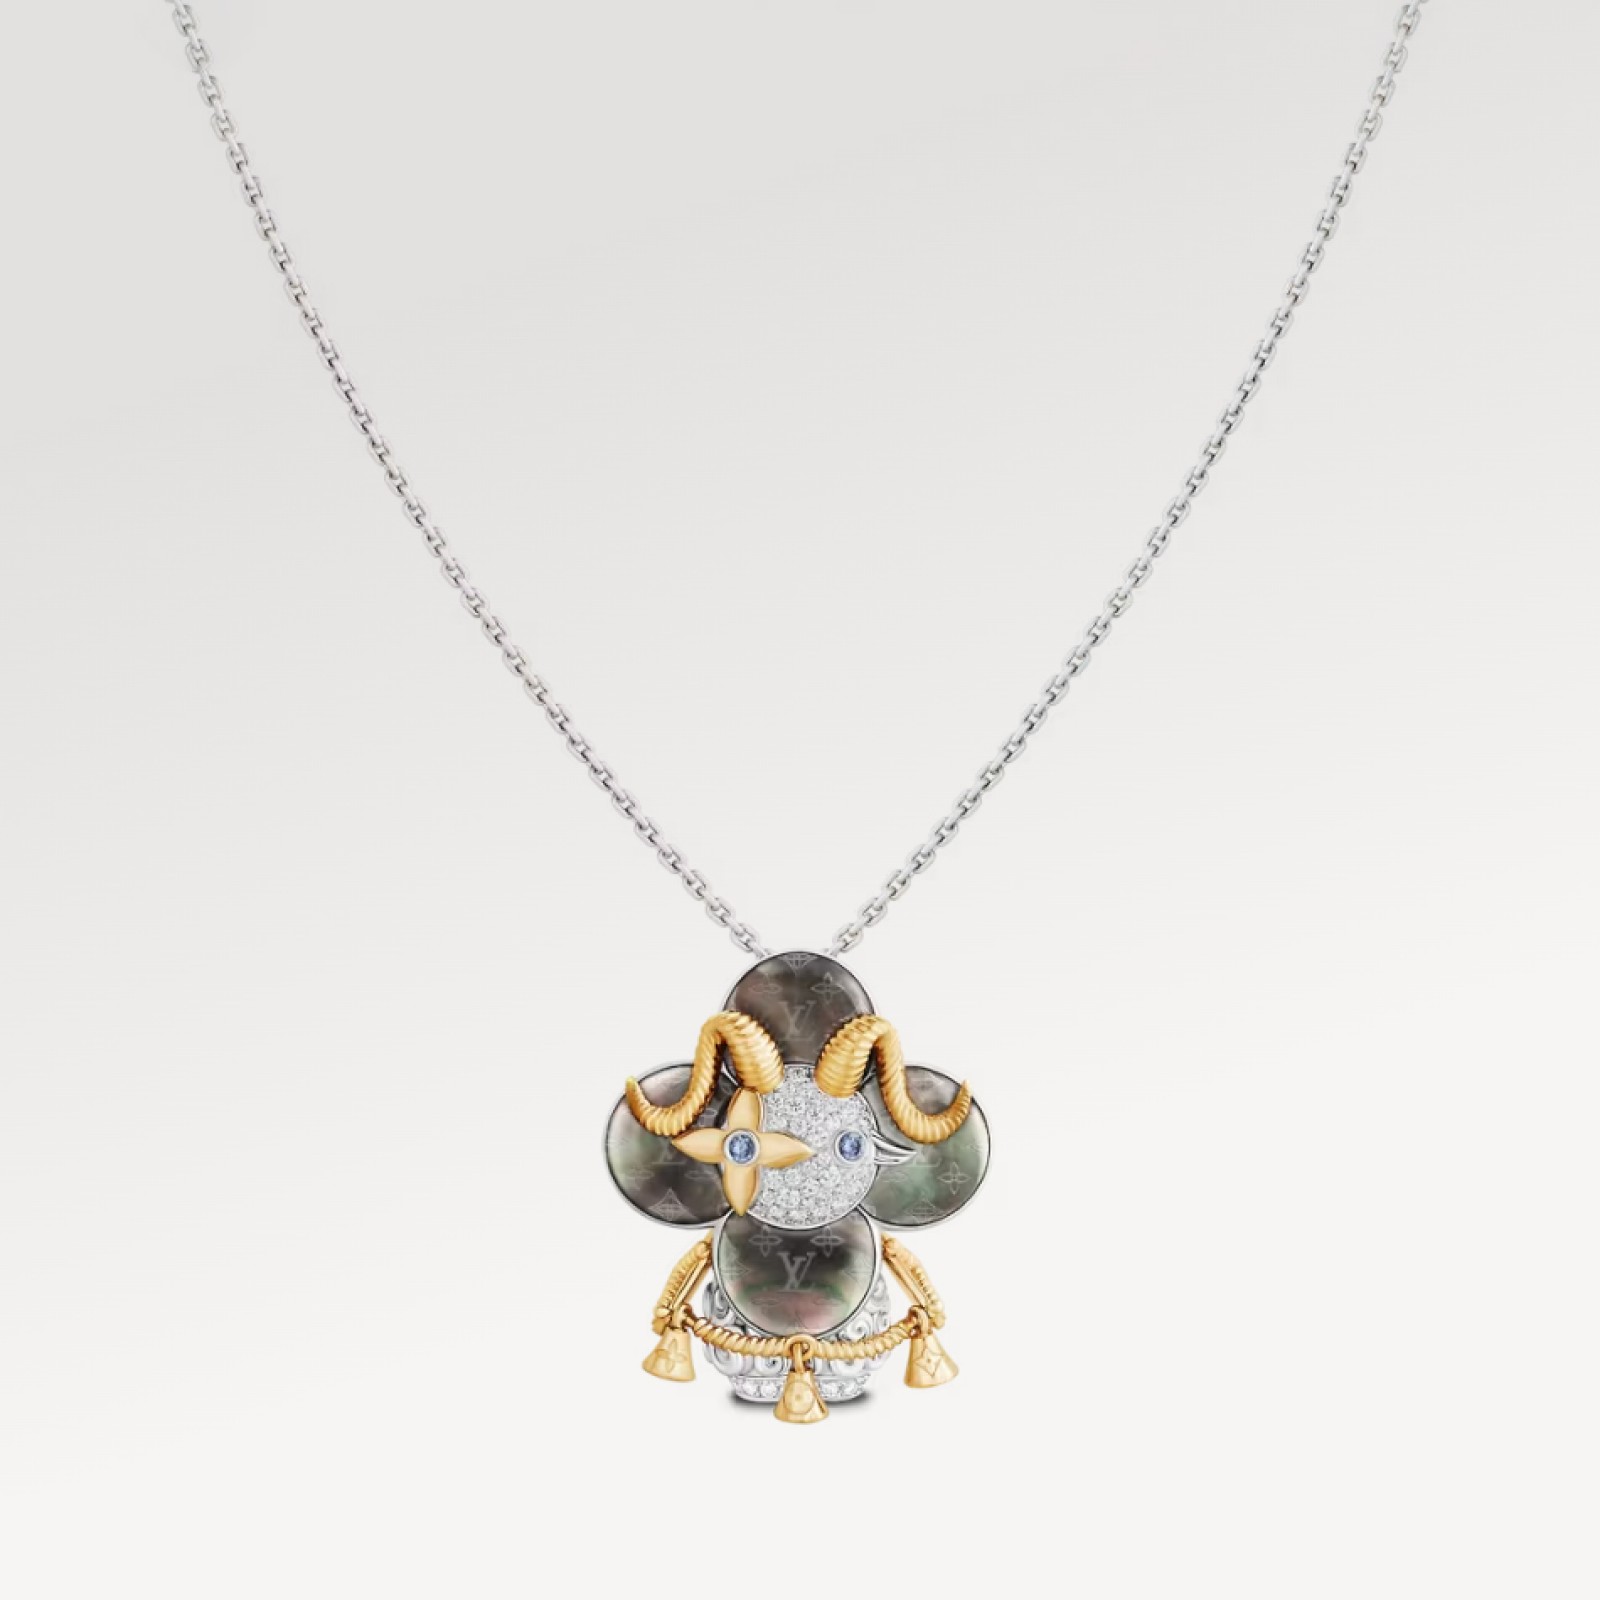 Vivienne Sheep Pendant, Yellow Gold, White Gold, Grey Mother-Of-Pearl, Diamonds & Colored Gemstones